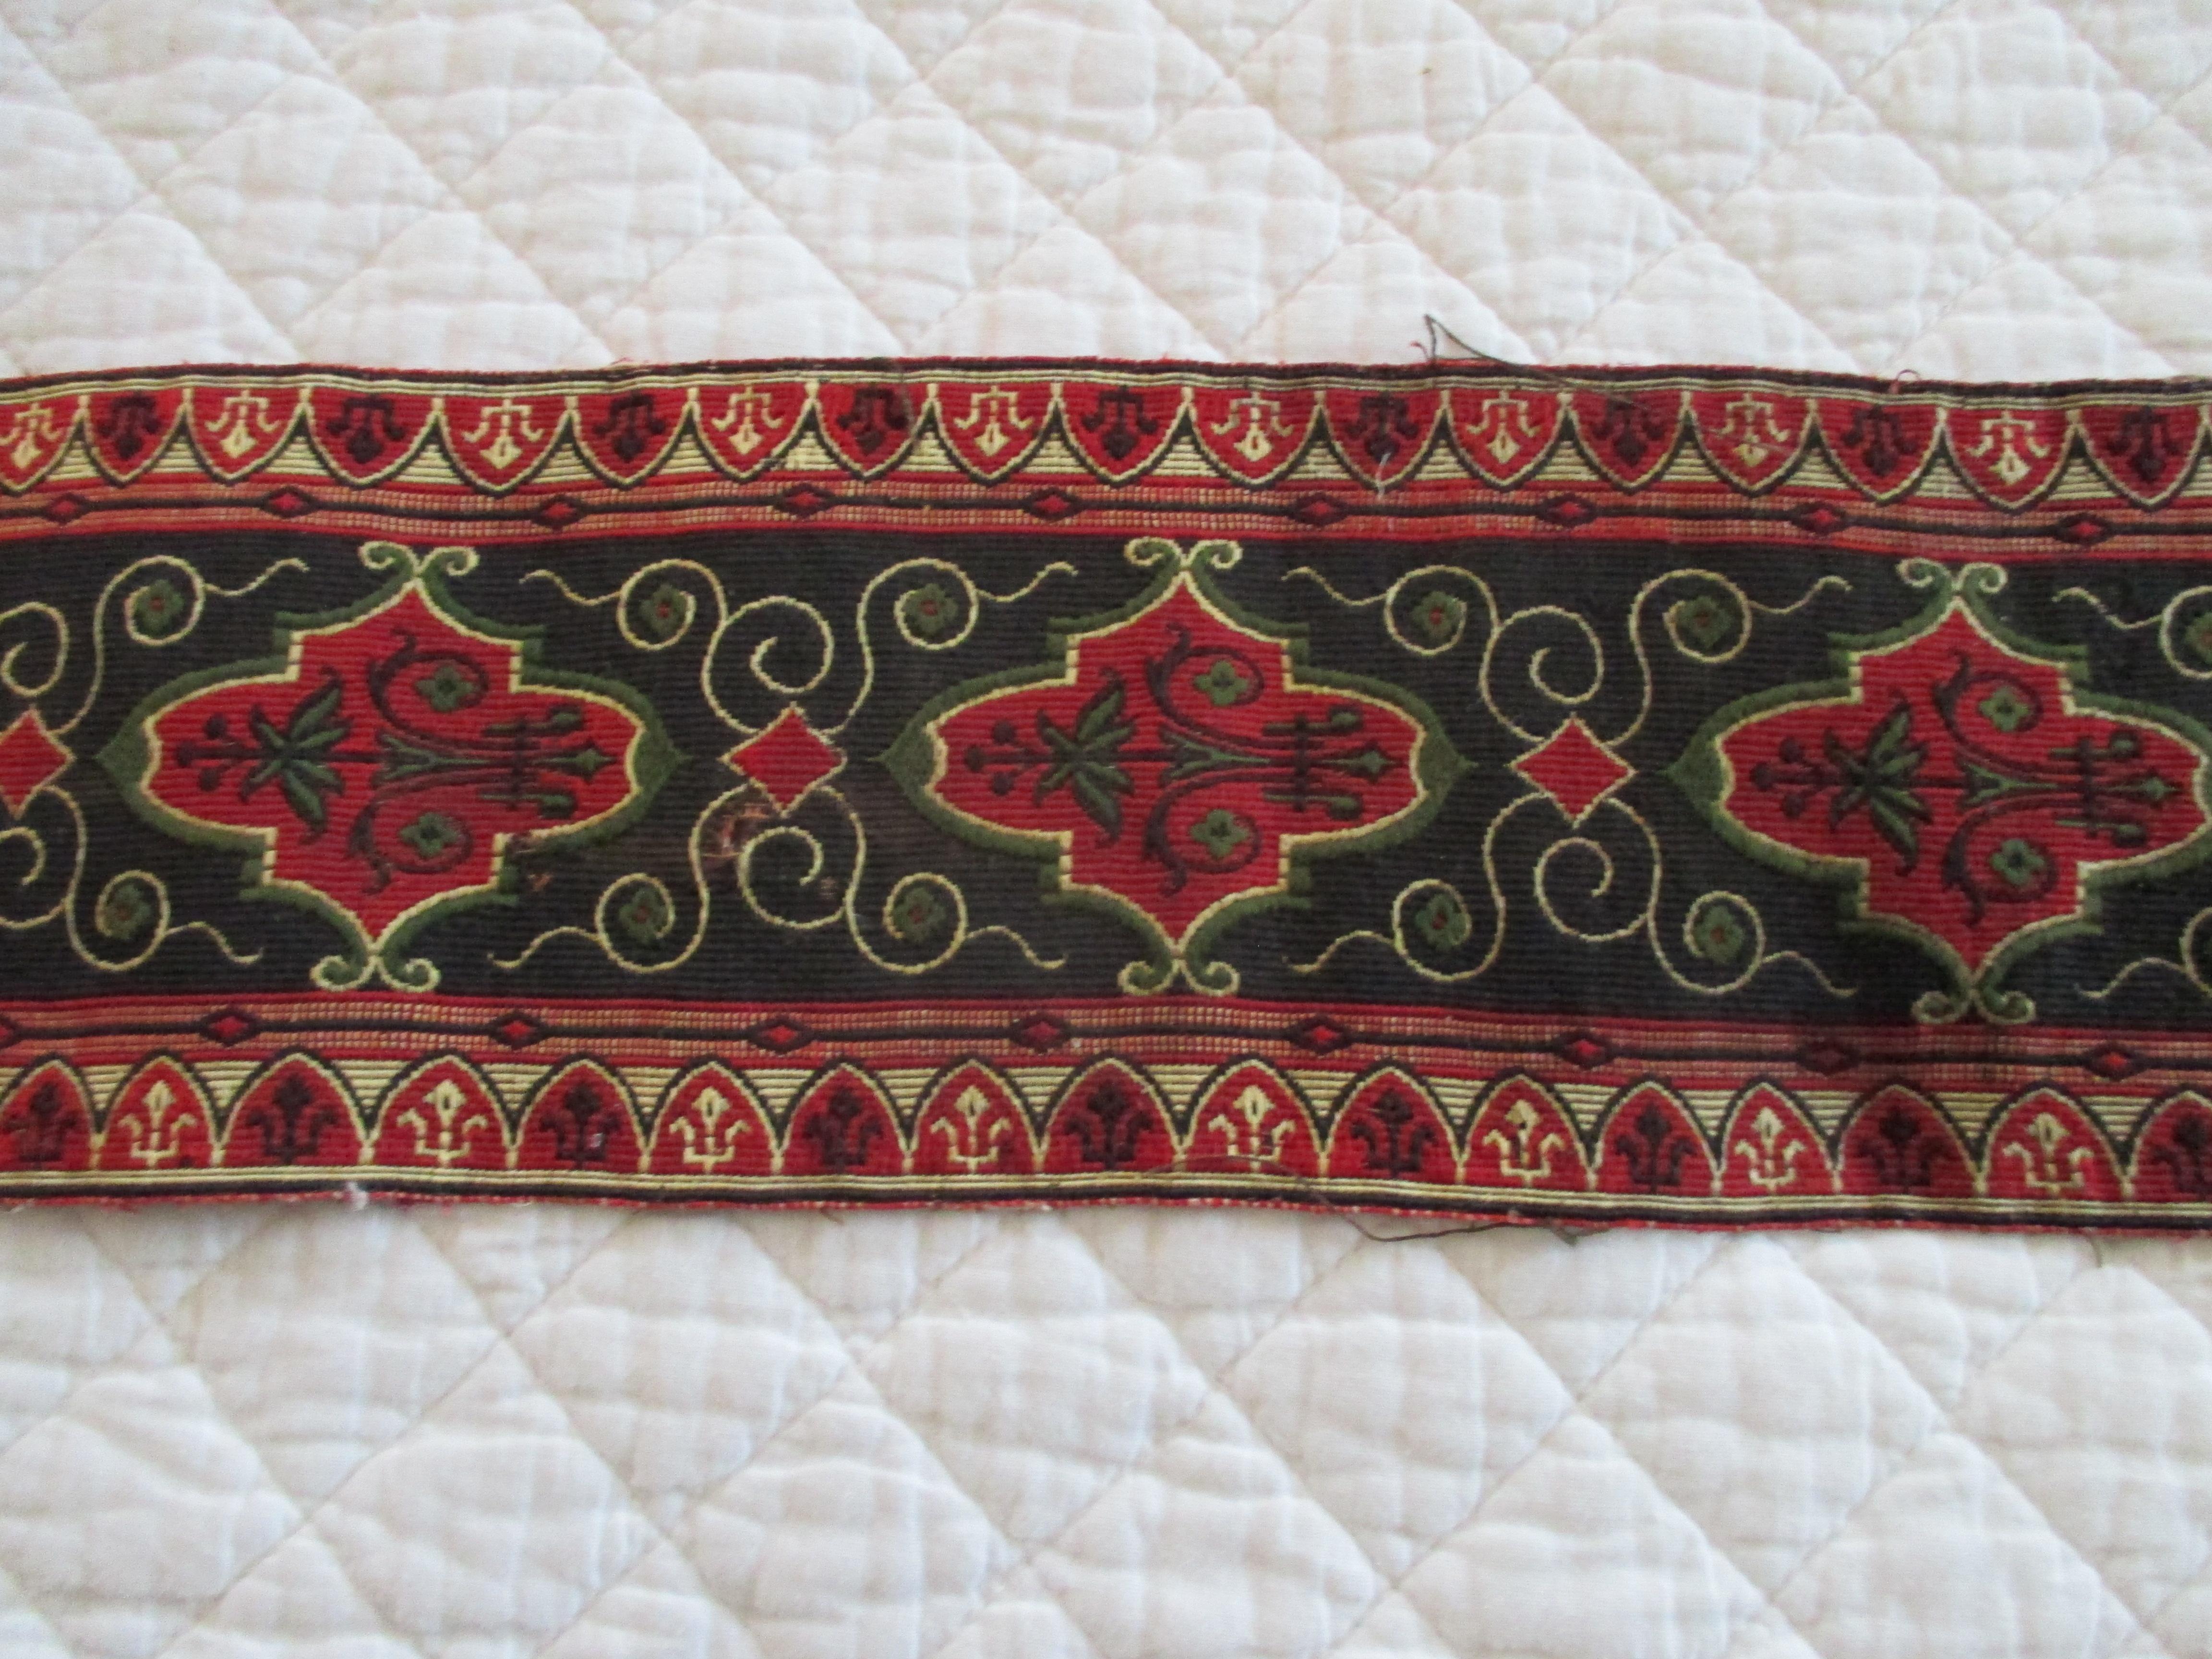 Antique red and black woven tapestry style trim.
Traditional floral pattern in shades of black, green, red and gold.
Ideal for pillows, curtains and upholstery.
Size: 76